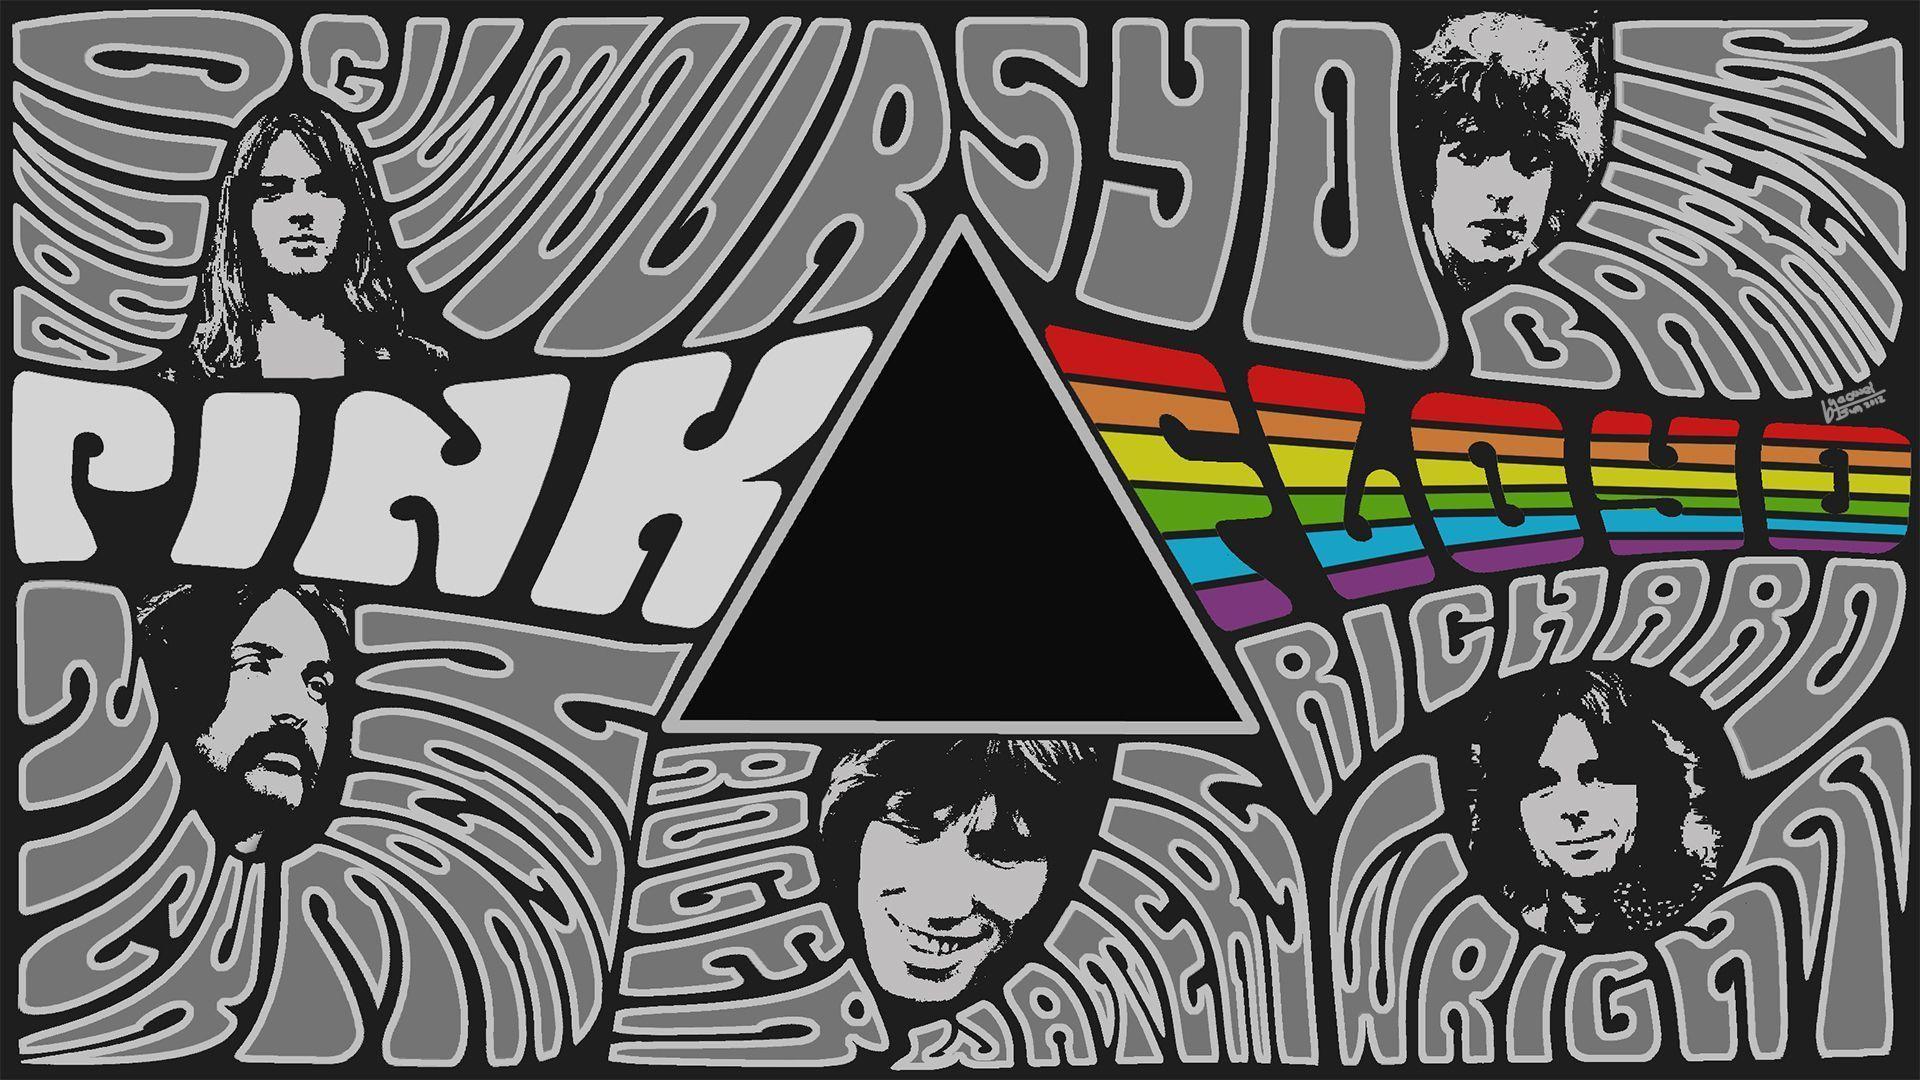 Pink Floyd free Wallpaper (6 photo on desktop) for family viewing